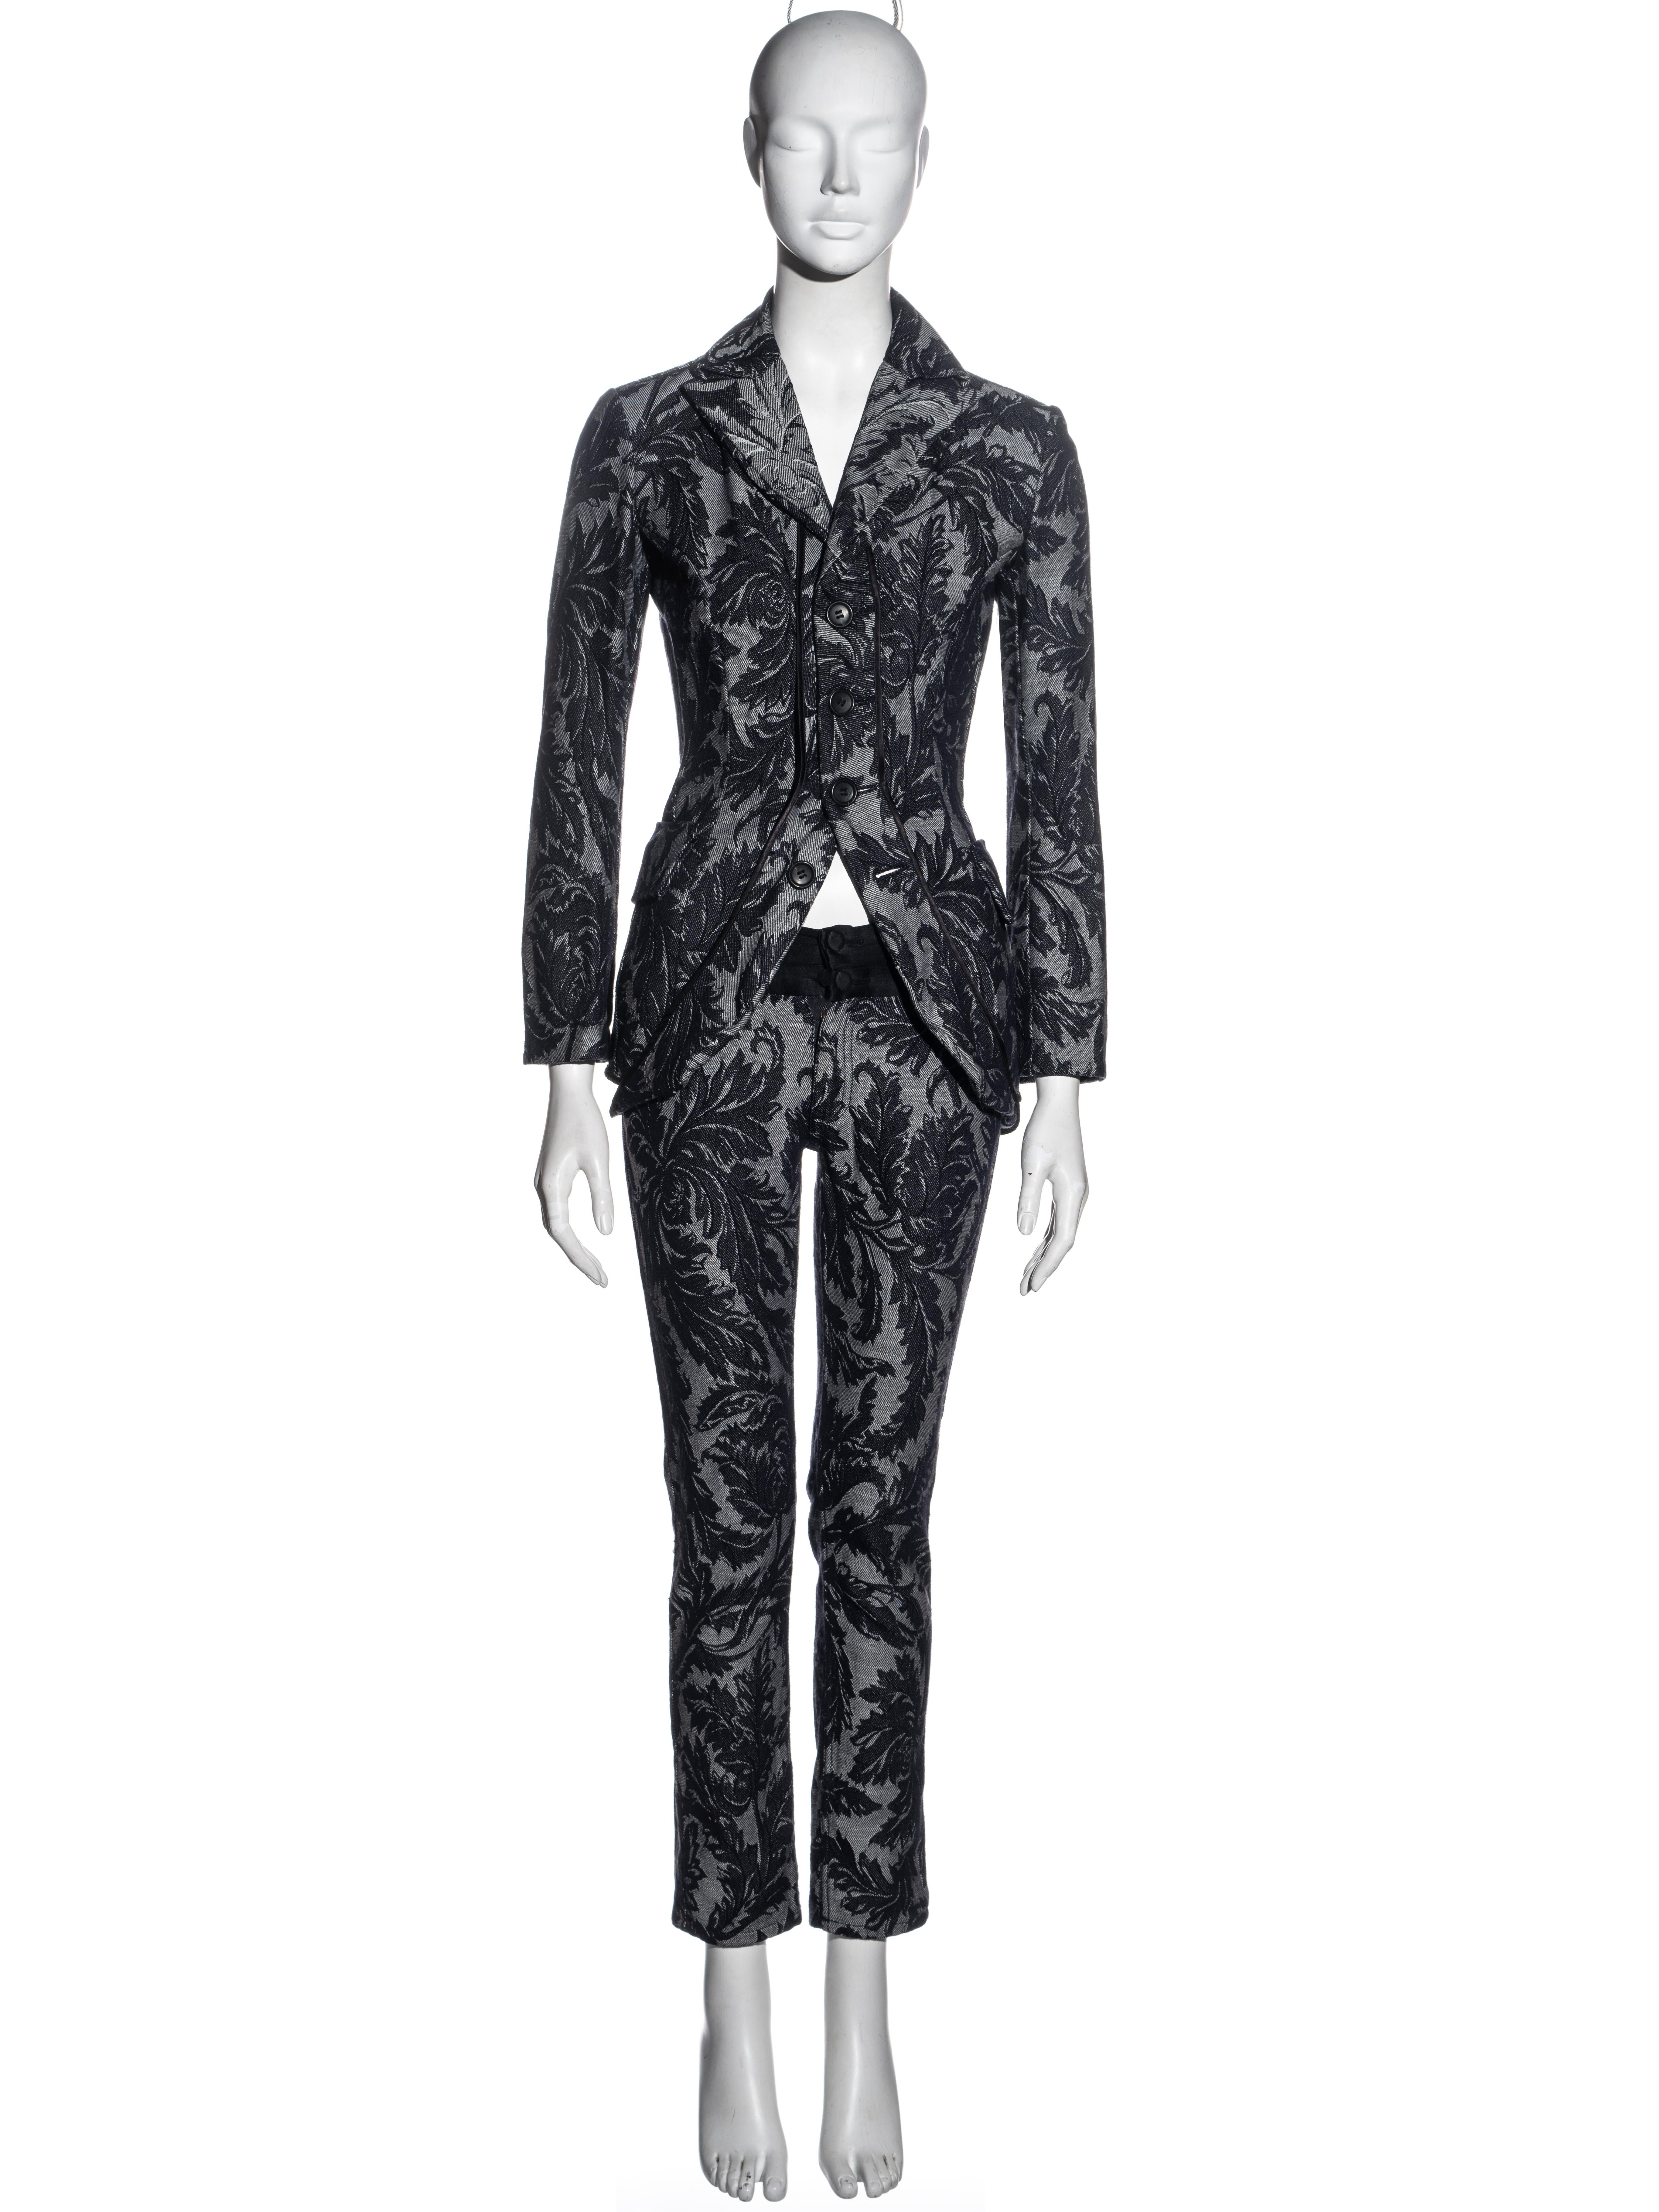 ▪ Junya Watanabe pant suit 
▪ Indigo denim brocade 
▪ Fitted tailcoat jacket 
▪ Matching skinny pants with cummerbund-style waistband
▪ Size: Extra Small 
▪ Spring-Summer 2007
▪ 100% Cotton
▪ Made in Japan